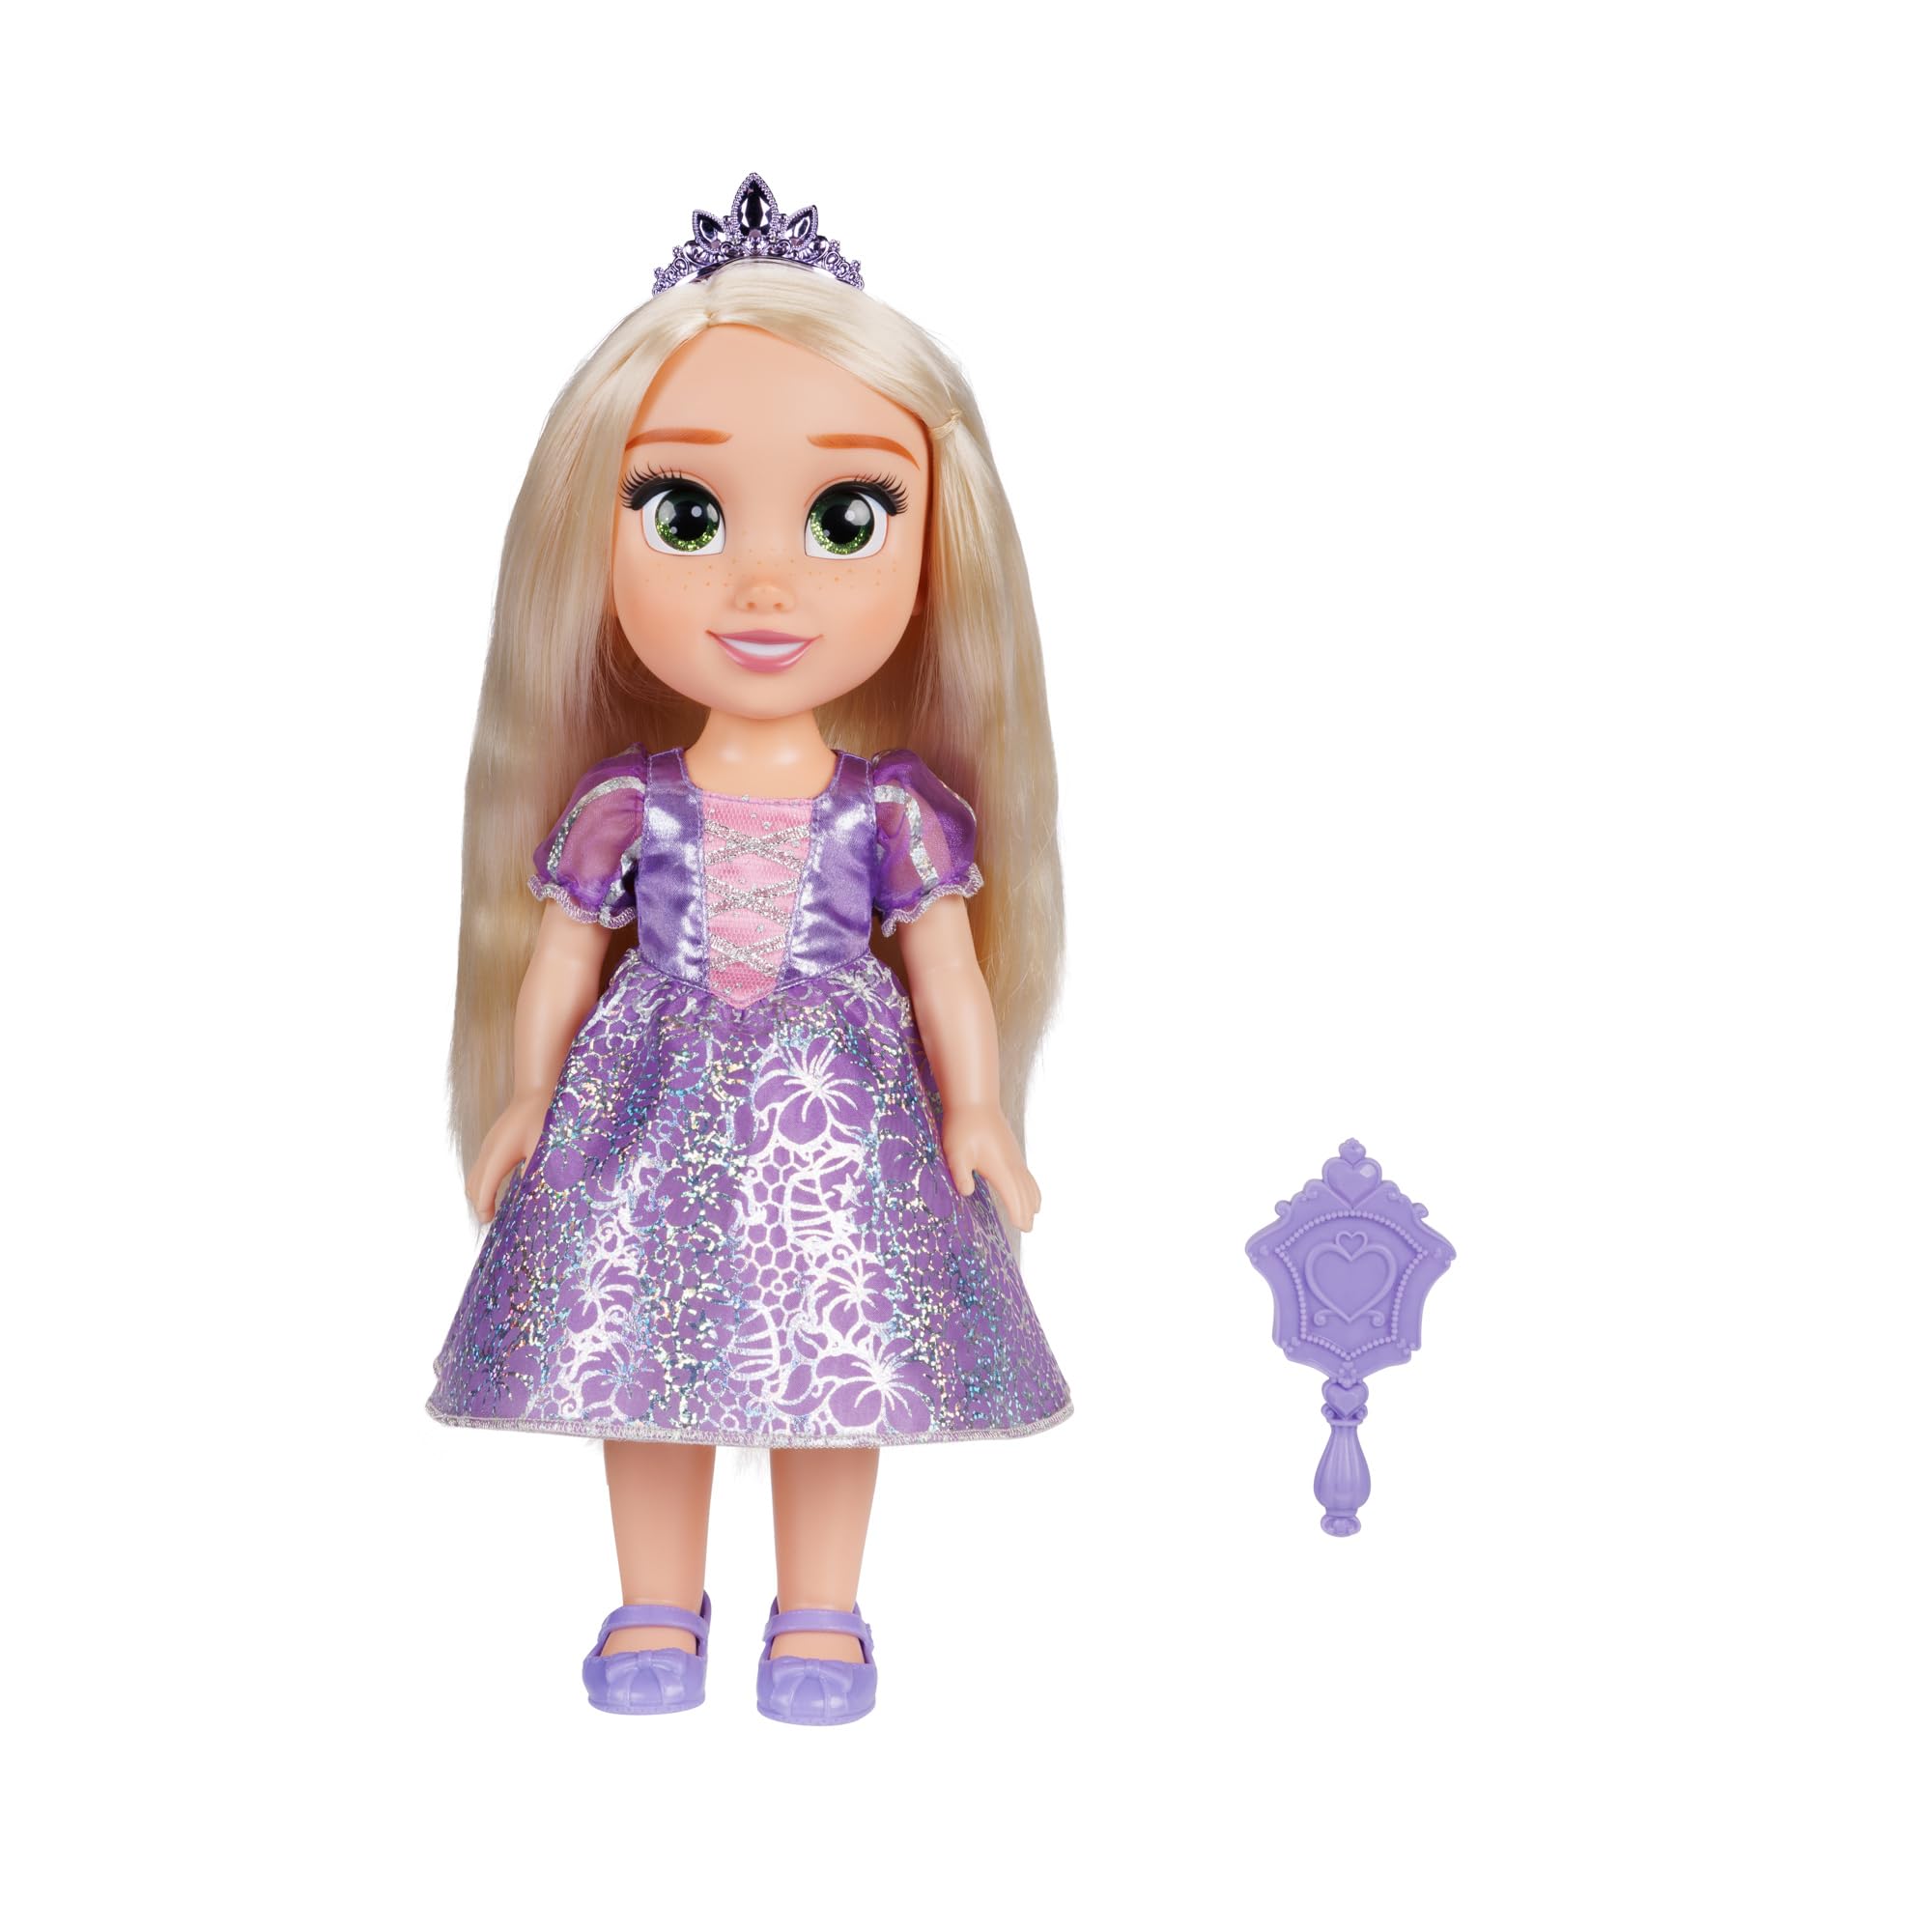 Disney Princess D100 My Friend Rapunzel Doll 14 inch Tall Includes Removable Outfit, Tiara, Shoes & Brush